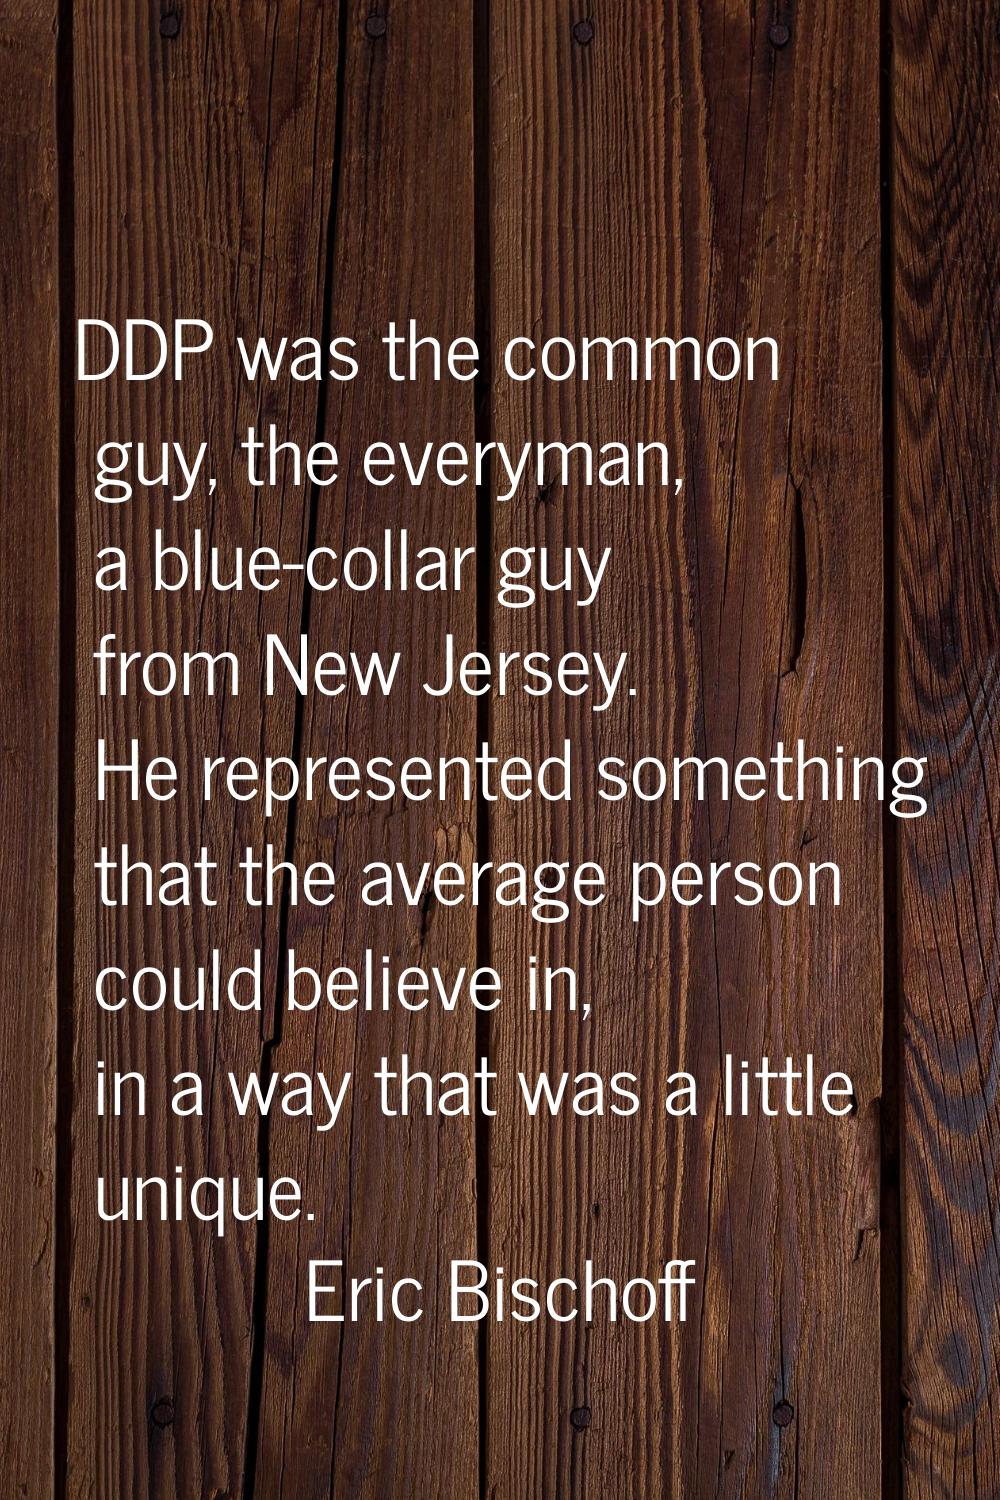 DDP was the common guy, the everyman, a blue-collar guy from New Jersey. He represented something t